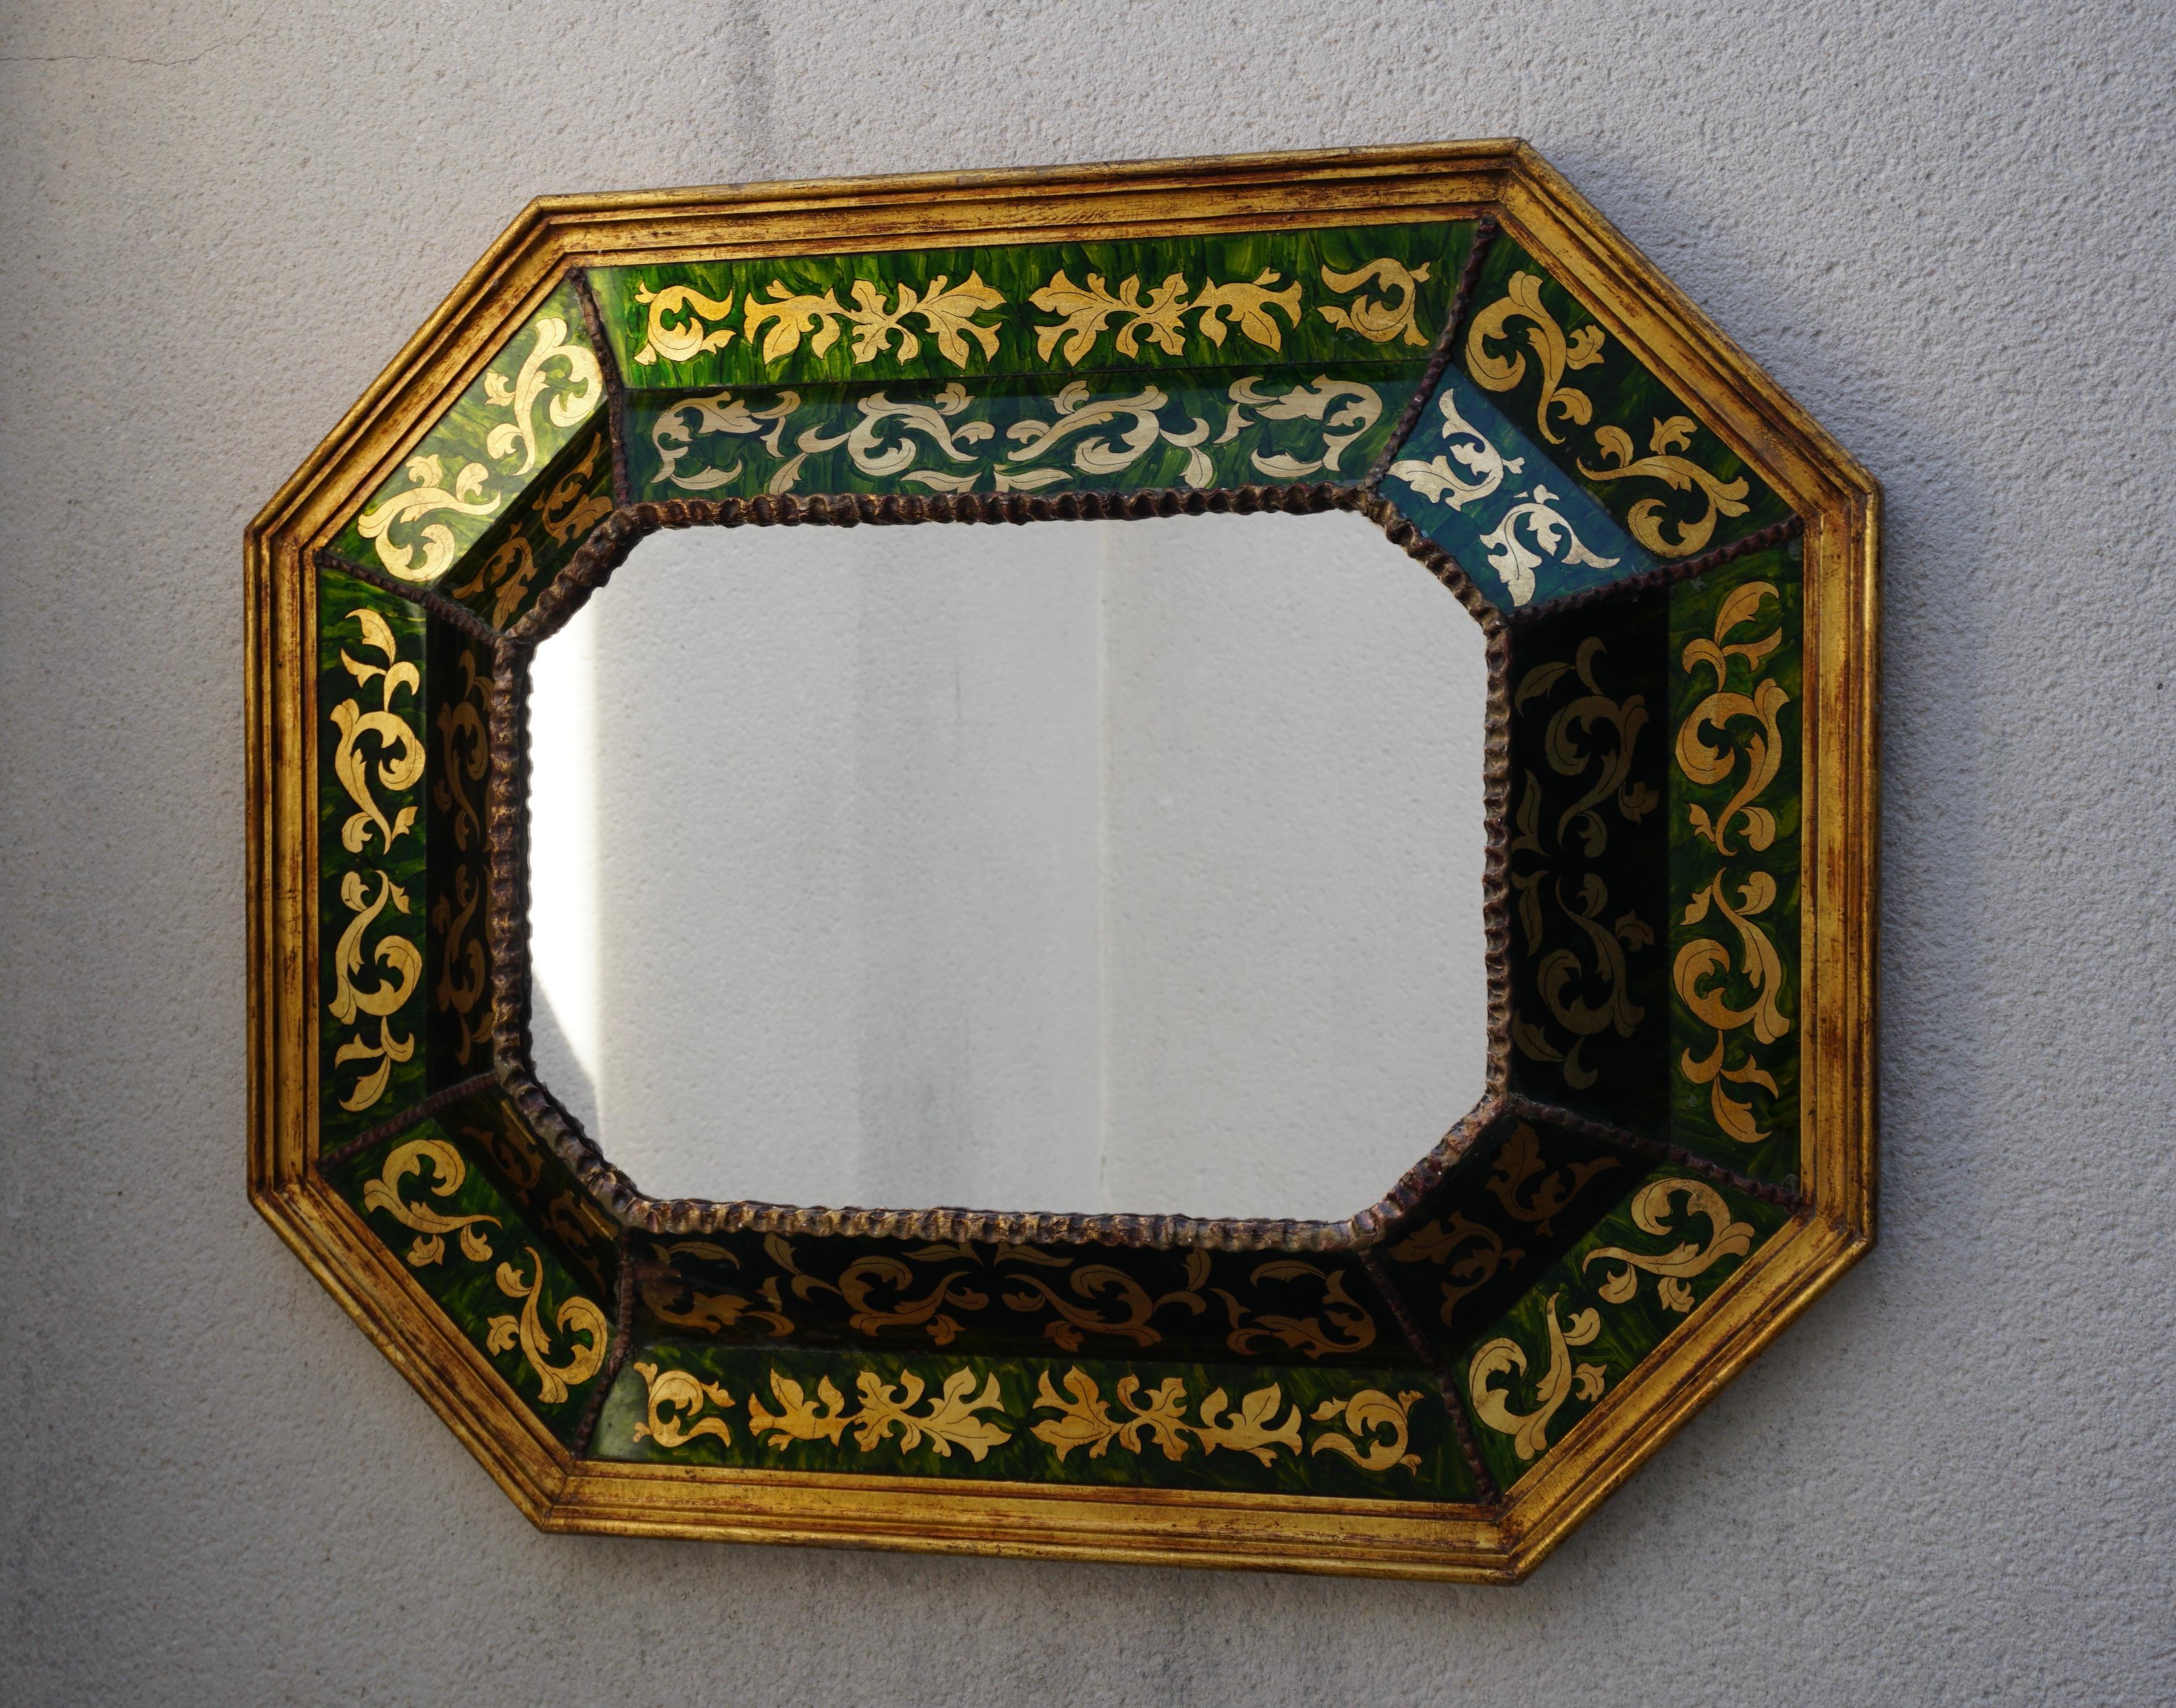 Hollywood Regency A Spanish Glass Verre Eglomise Gilded Mirror c. 1930 For Sale